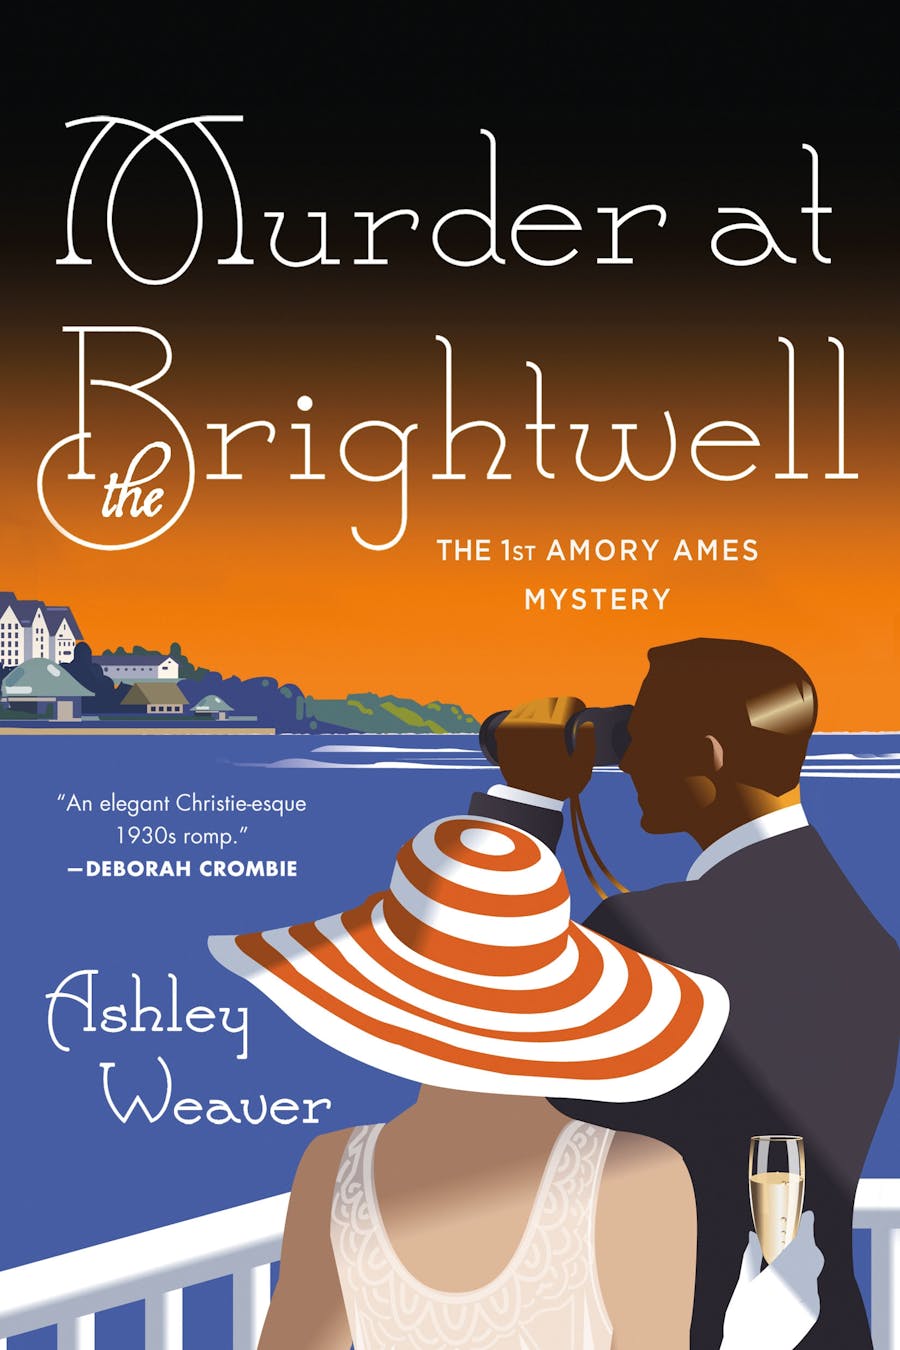 Murder at the Brightwell by The First Amory Ames Mystery